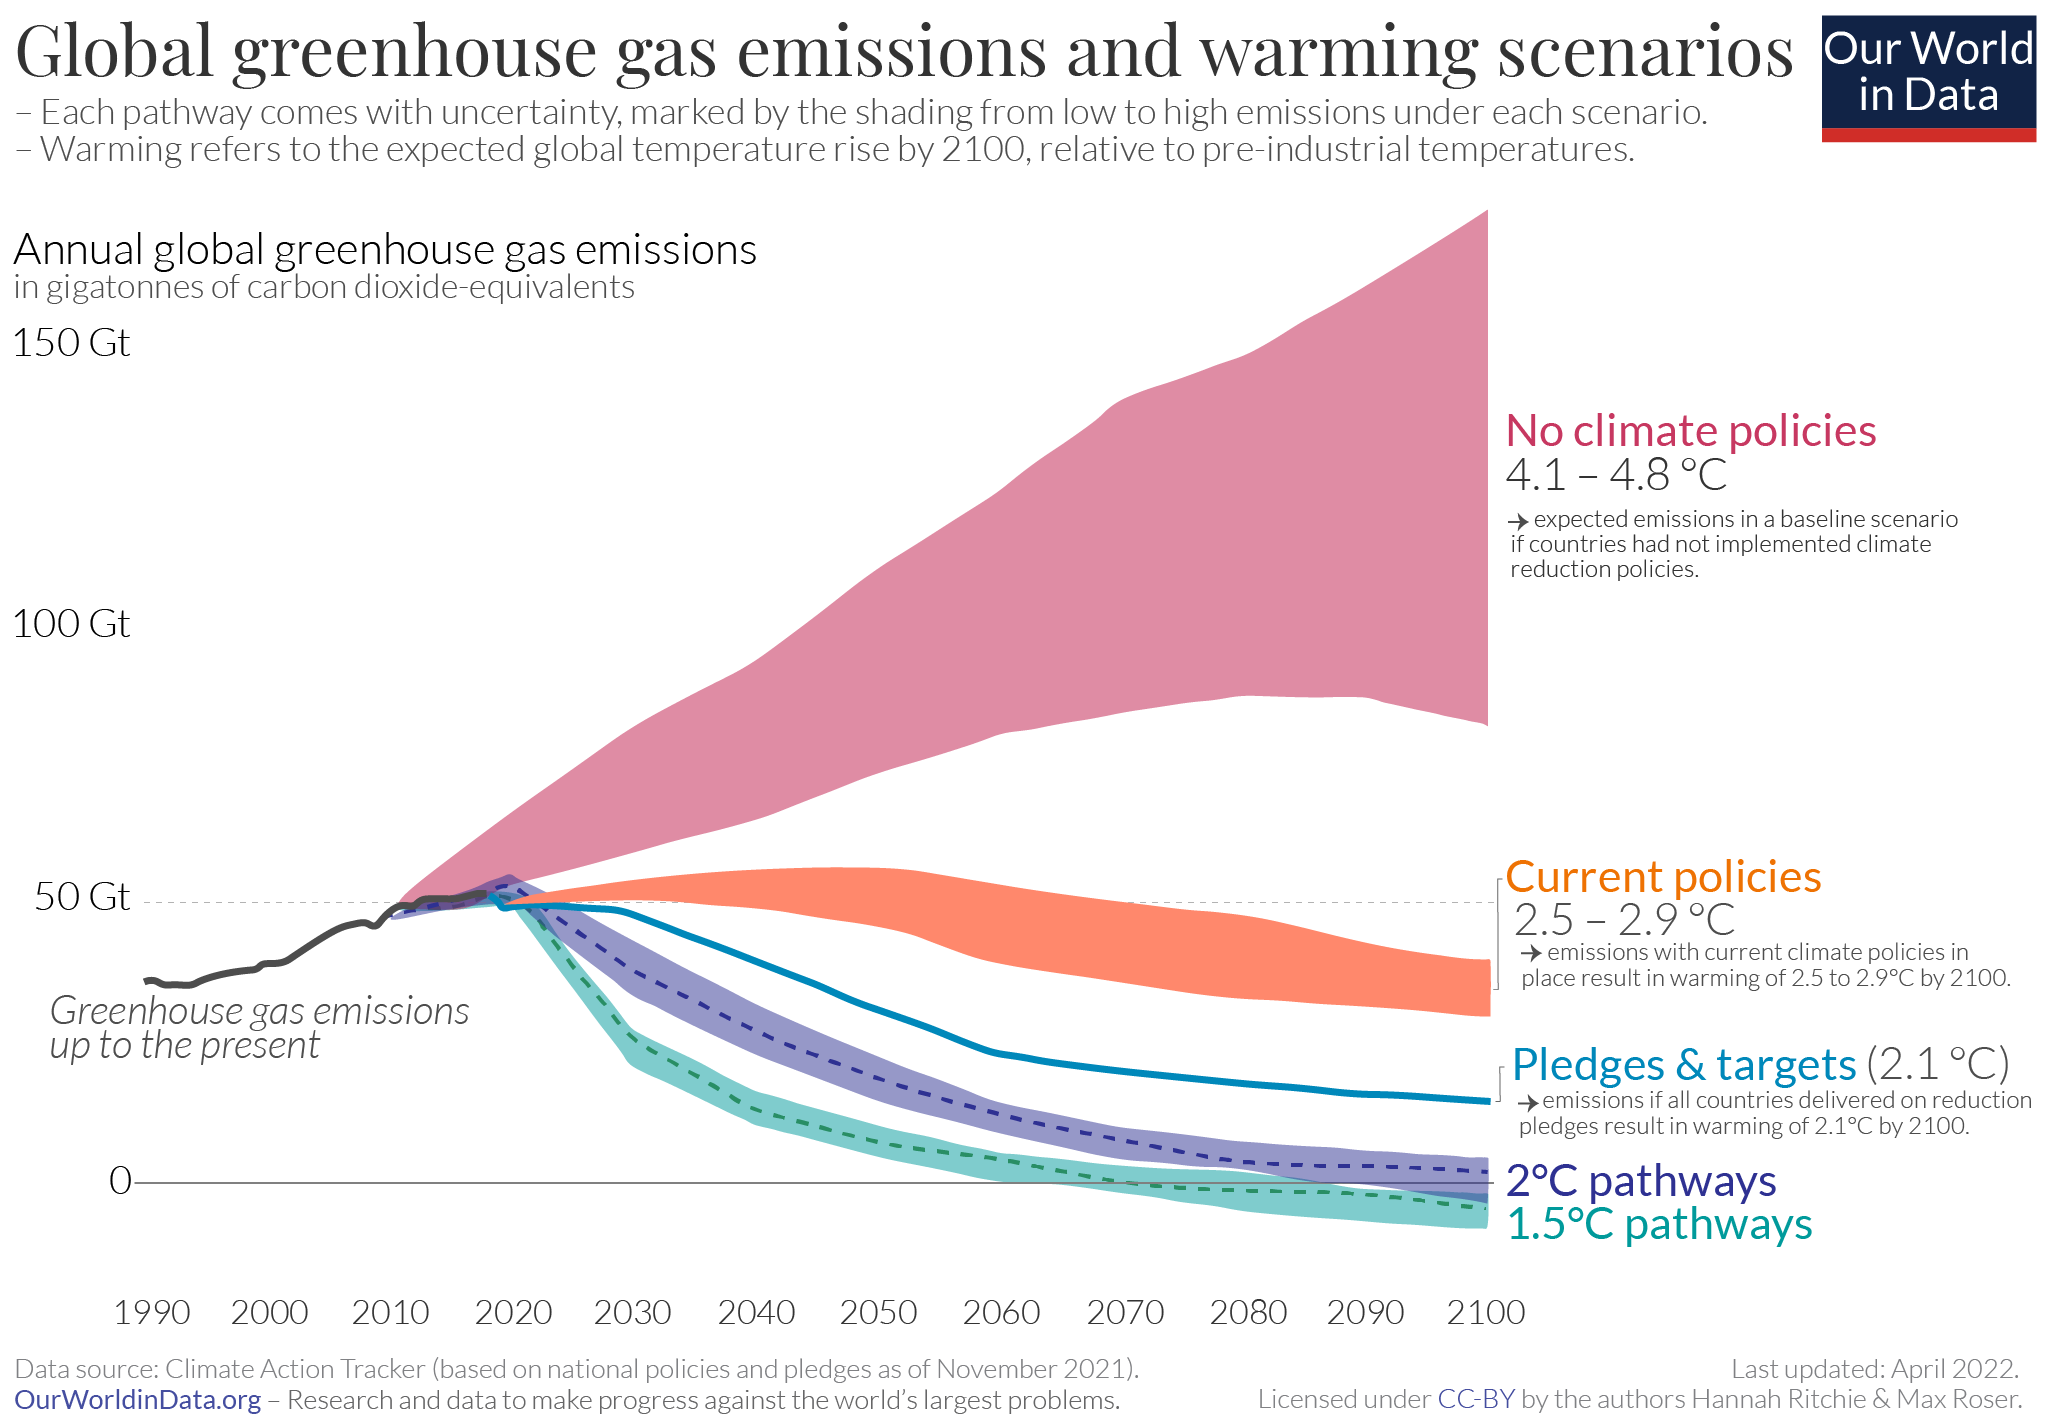 The "Our World in Data" Global greenhouse gas emissions and warming scenarios chart, which shows CO2e levels through to 2100. No climate policies show warming to 4.18-4.8C, current policies show warming to 2.5-2.9C, pledges and targets show warming to 2.1C, and 2C and 1.5C pathways are also shown (both of which require some amount of negative emissions).